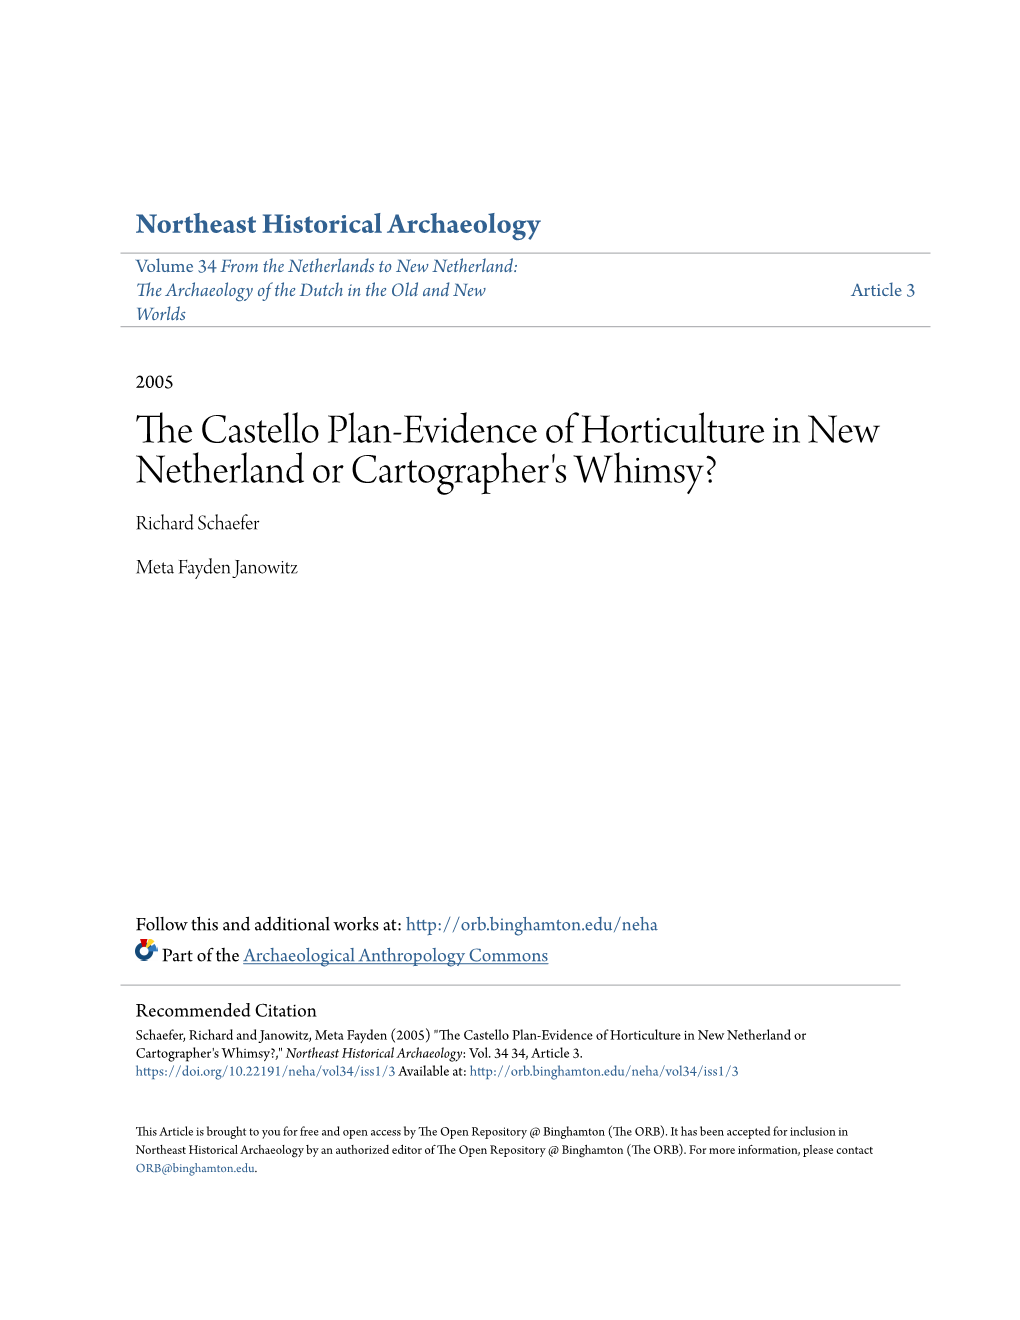 The Castello Plan-Evidence of Horticulture in New Netherland Or